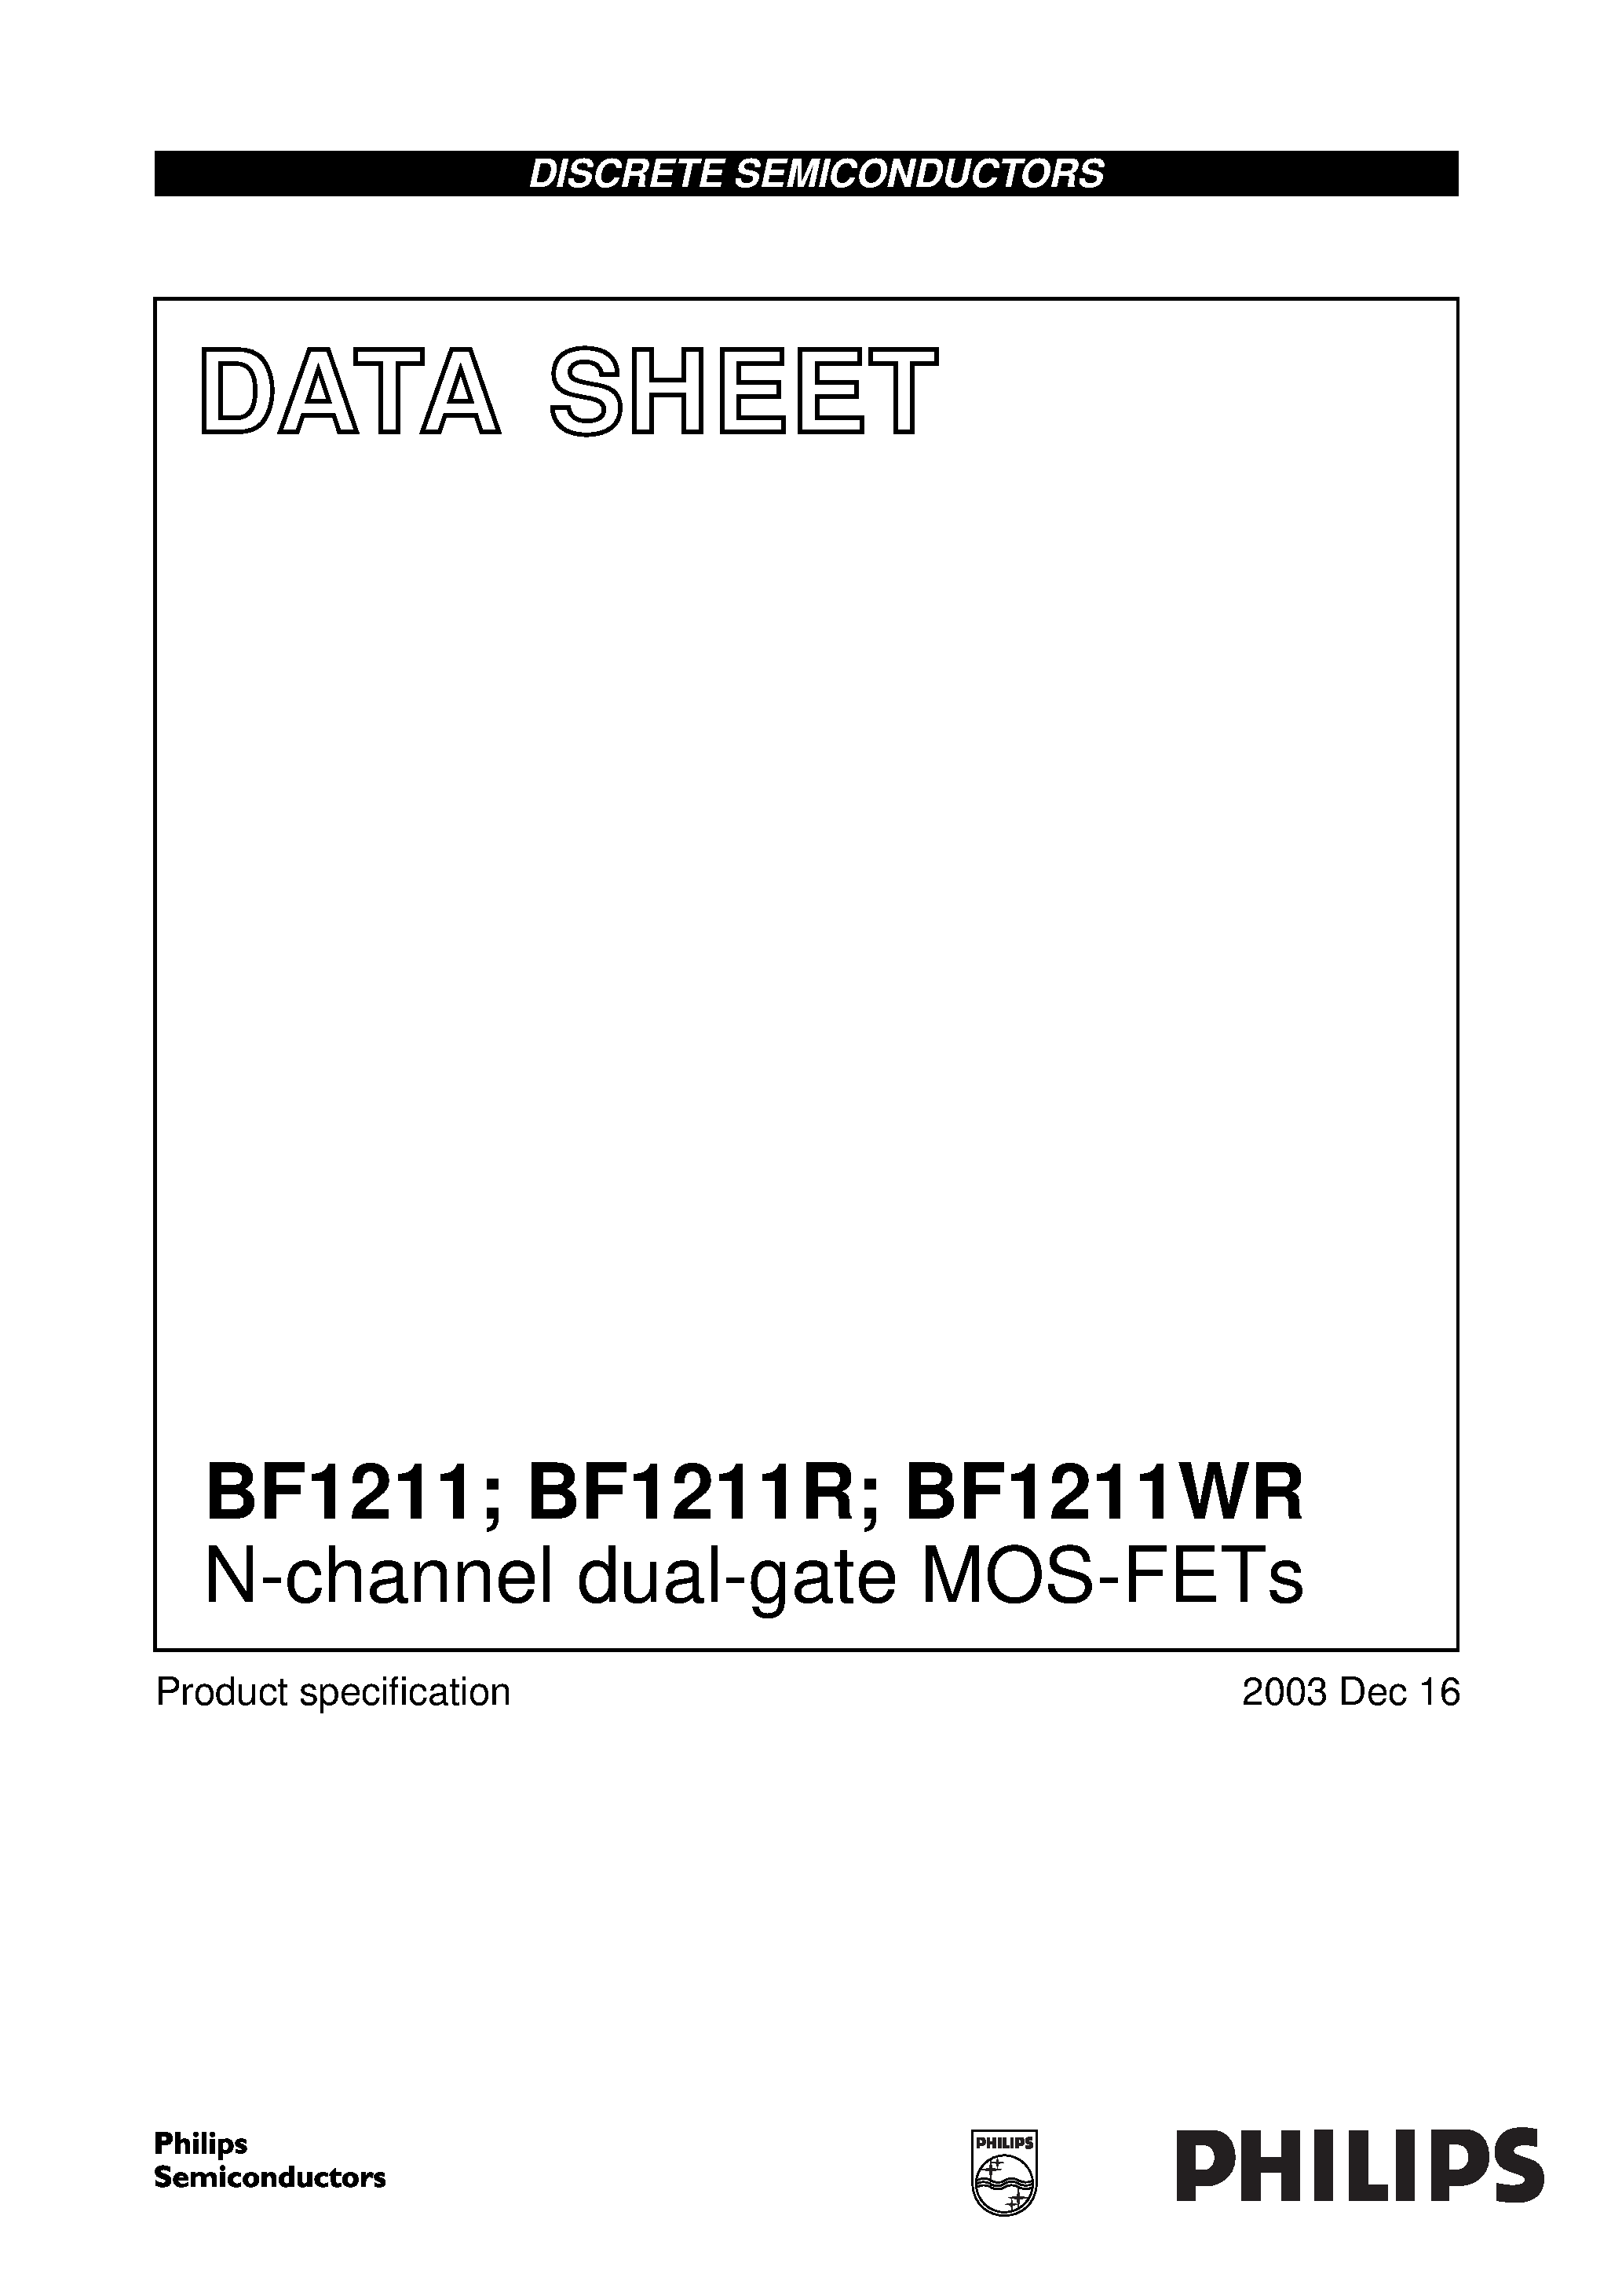 Datasheet BF1211R - N-channel dual-gate MOS-FETs page 1